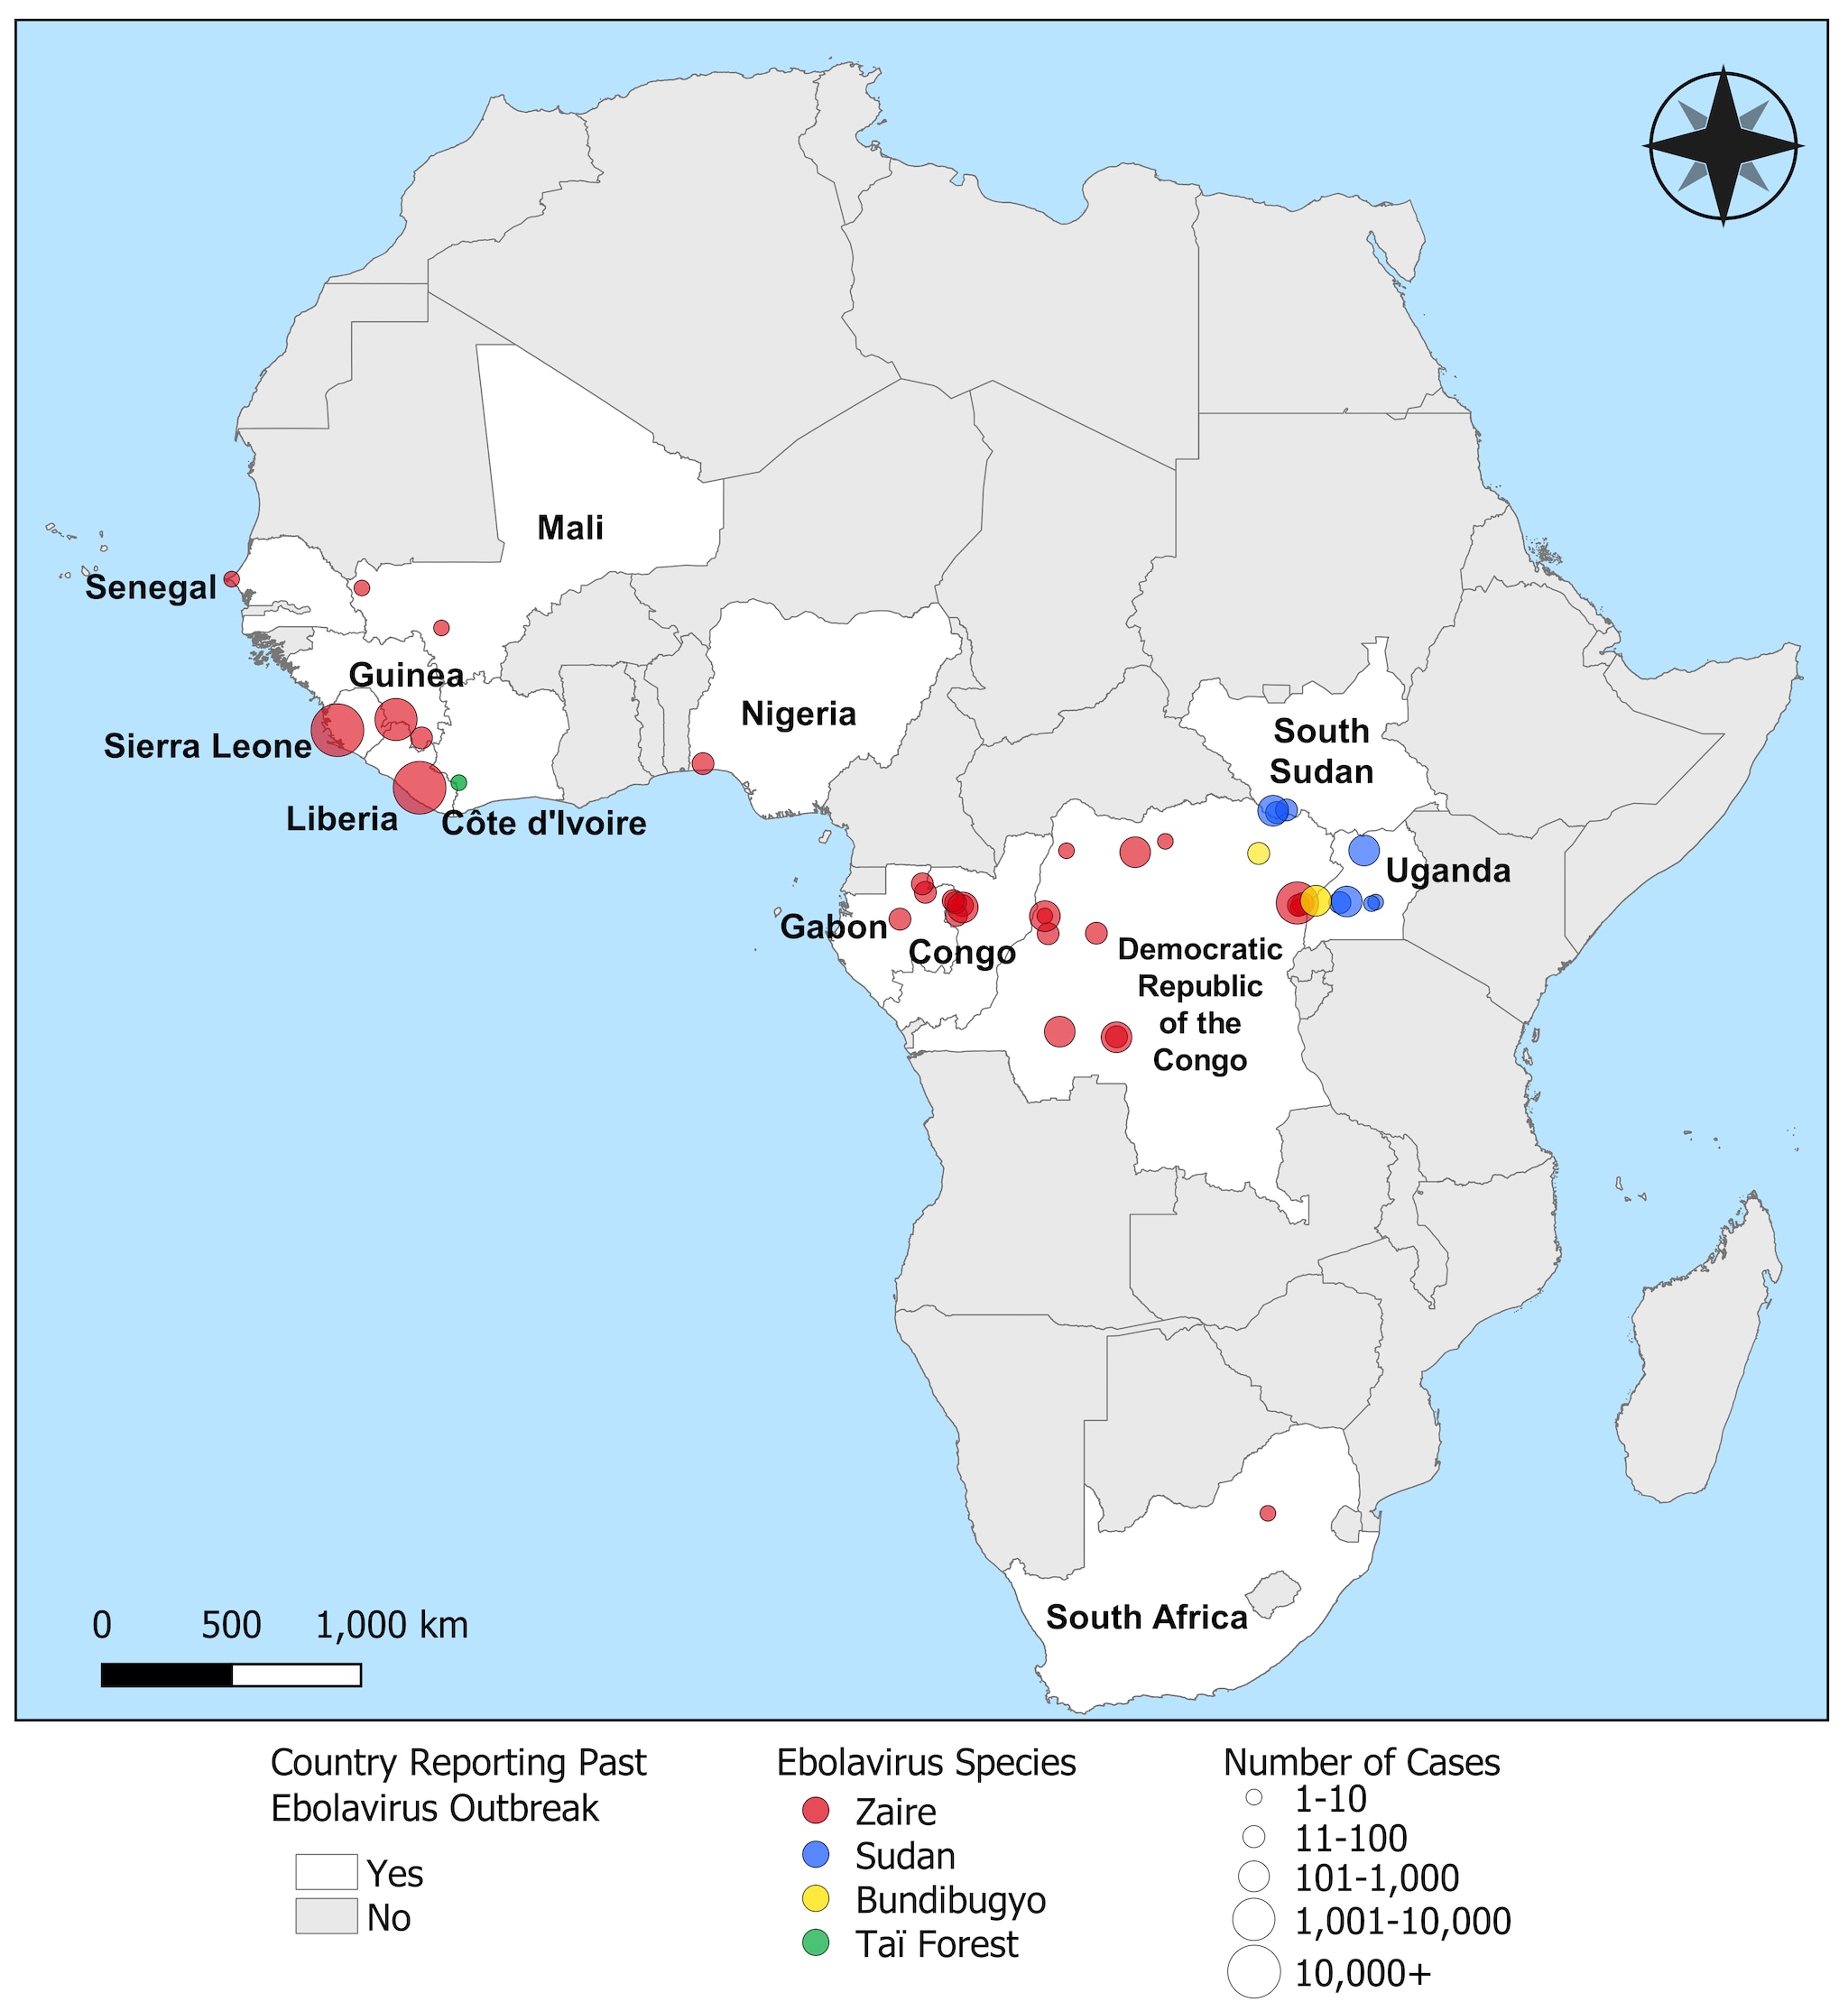 Map showing where Ebola outbreaks have occurred in Africa